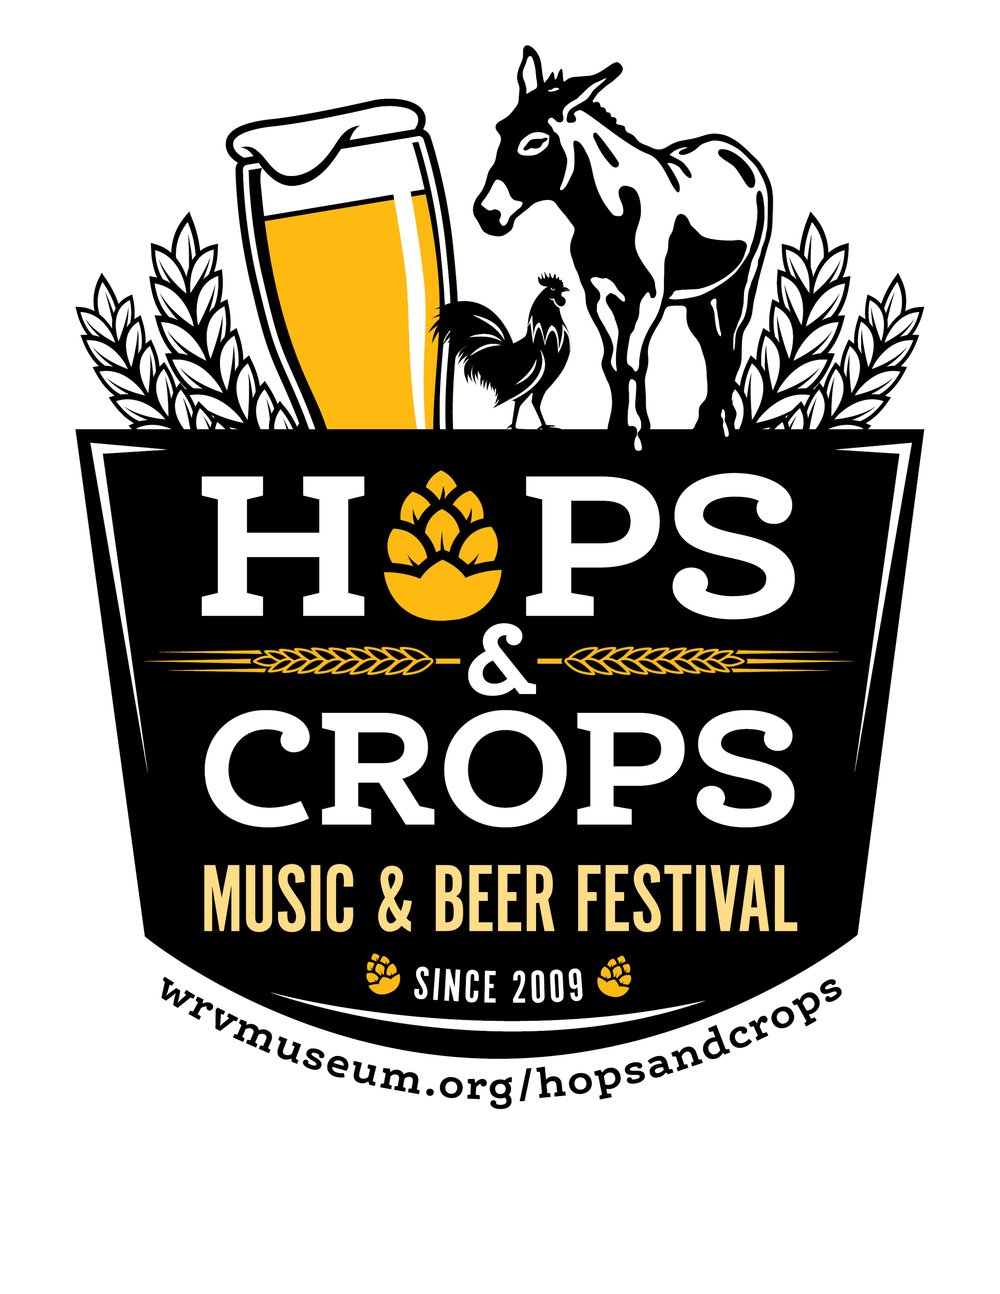 Hops & Crops Music and Beer Festival